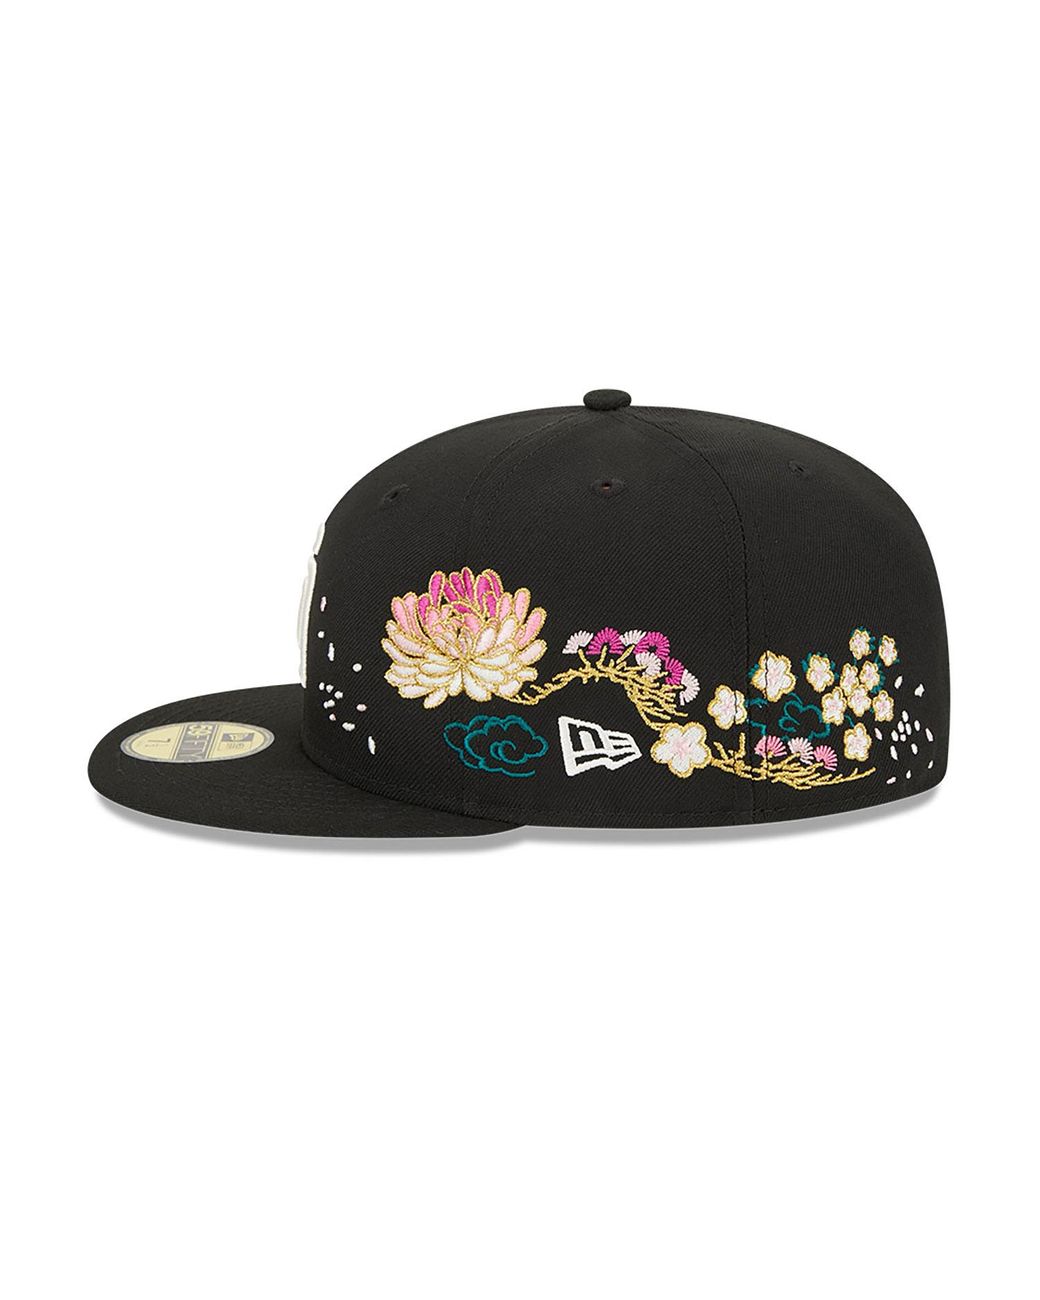 KTZ San Diego Padres Cherry Blossom 59fifty Fitted Cap in Black 